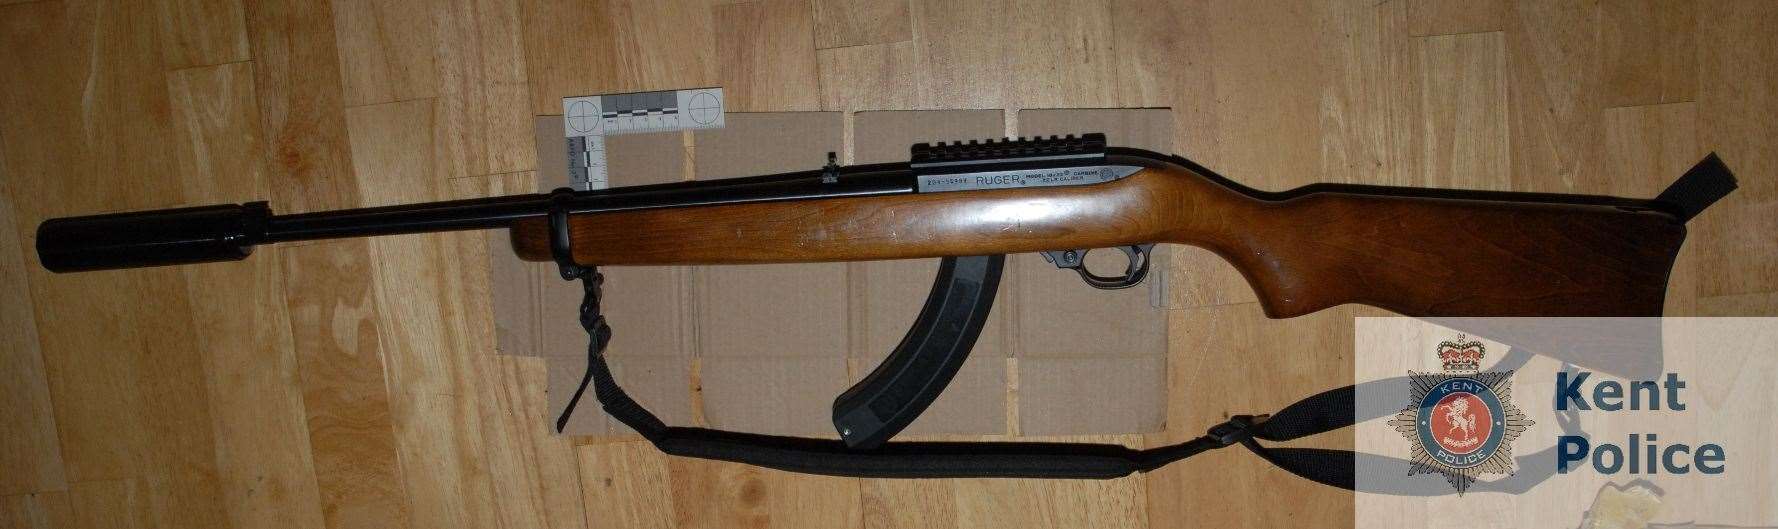 A gun which police found when they raided the home of Geoffrey Mayne